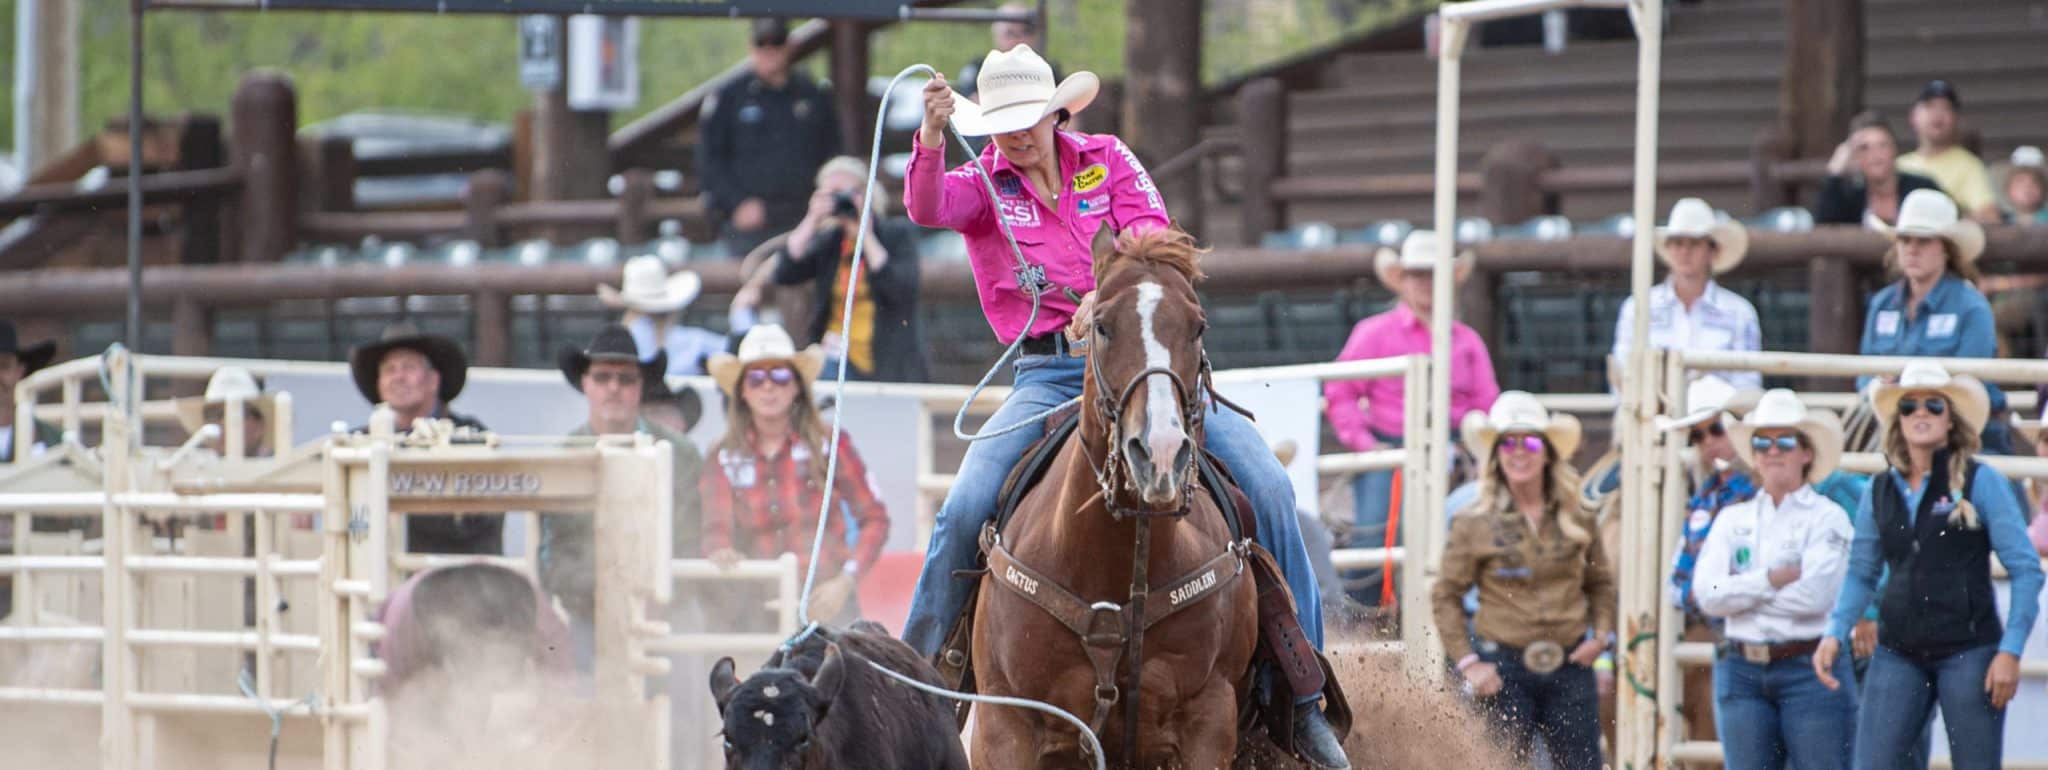 madison-outhier_deadwood_may2021_prorodeo_shortround_alainastangle-1-scaled